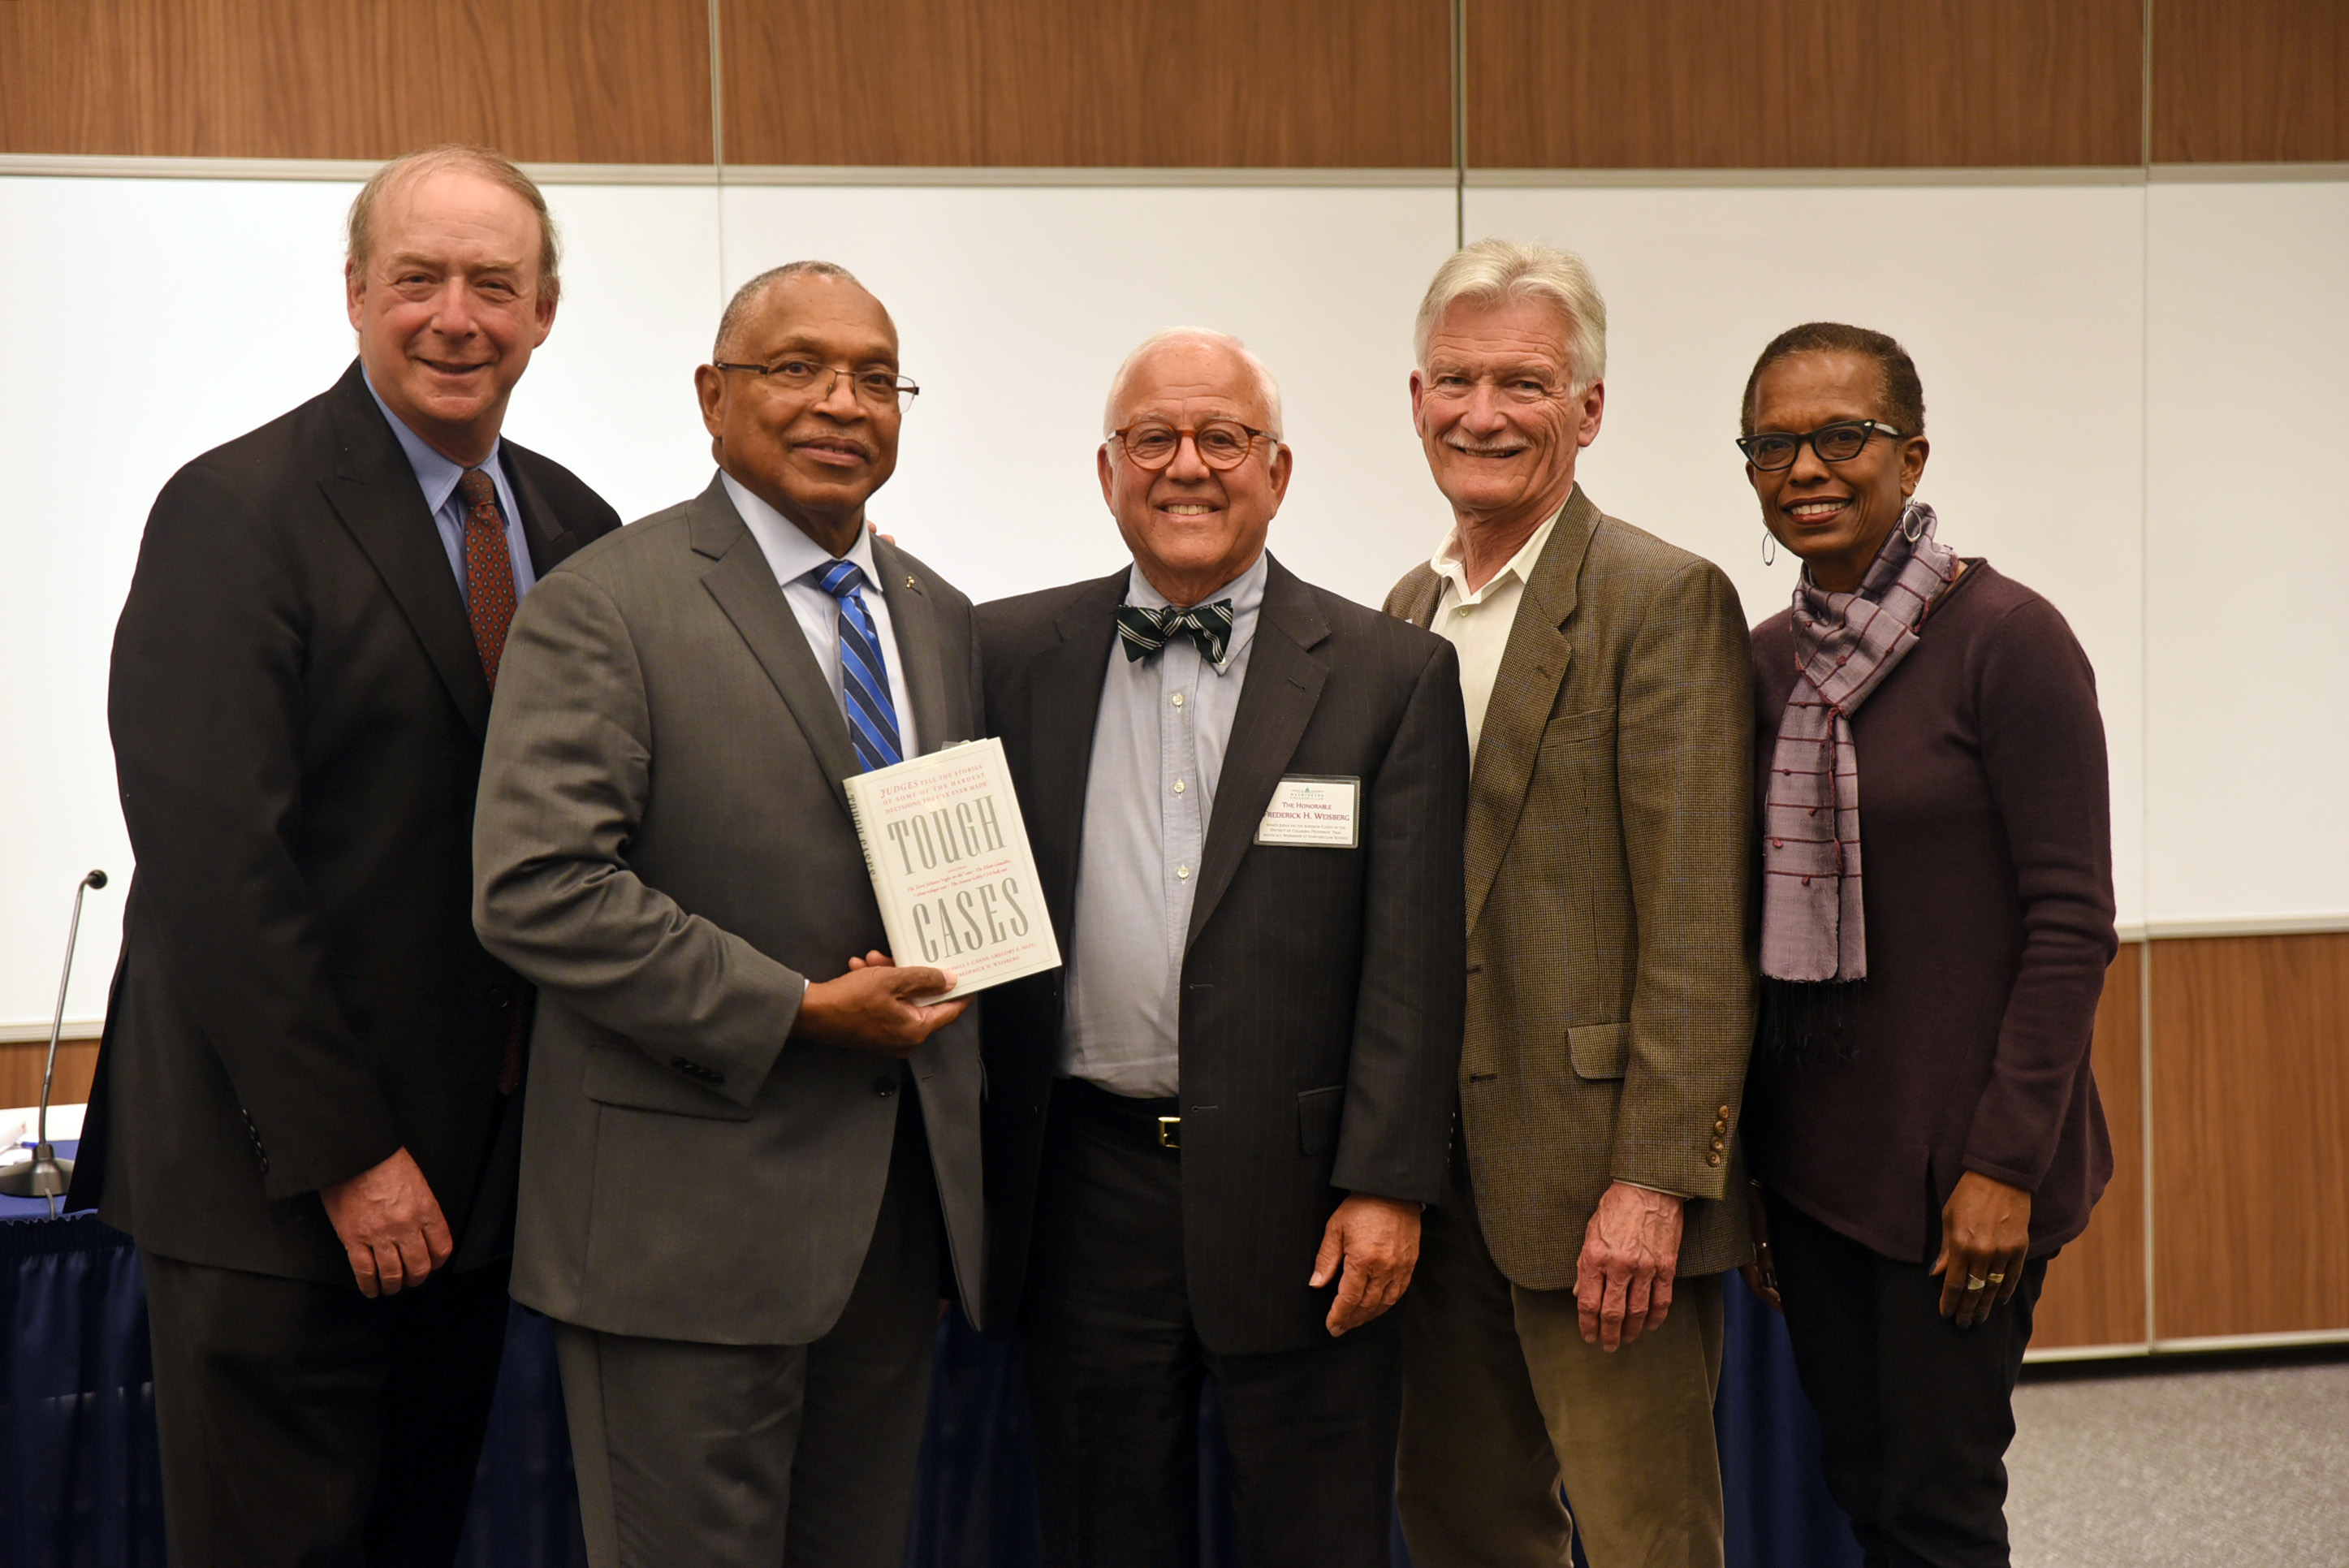 Judges Russell F. Canan, Reggie B. Walton ’74, Frederick H. Weisberg, and Gregory E. Mize with Professor Angela Davis.